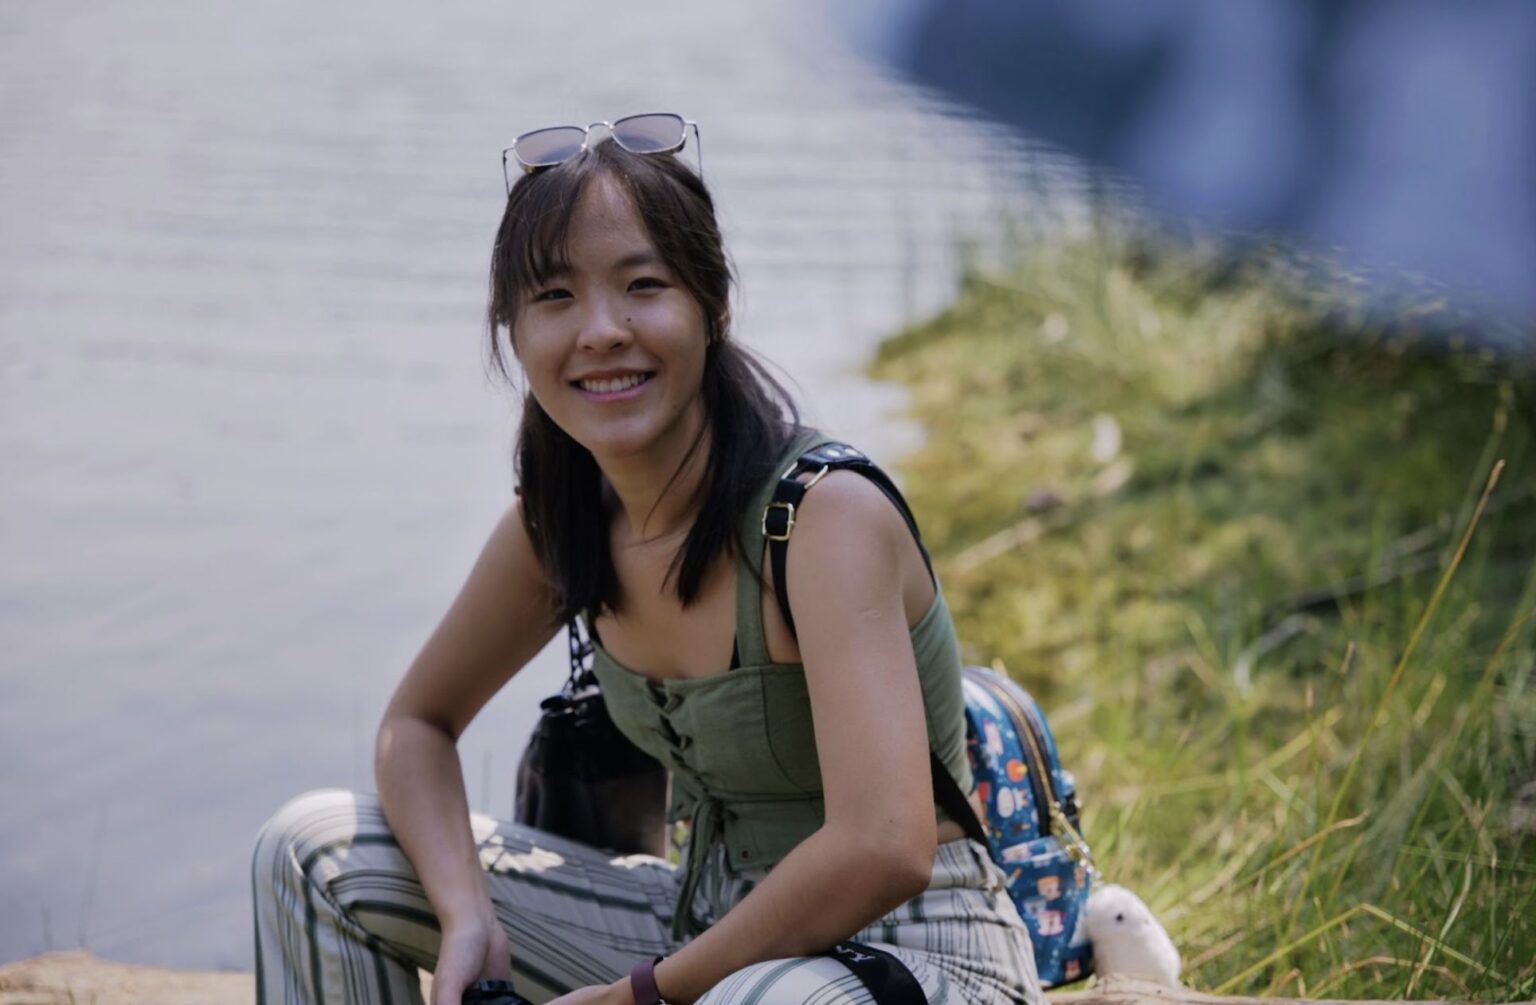 As an award-winning director, Luying Wang has solidified her place in the industry. Learn more about Luying Wang's impressive career so far.